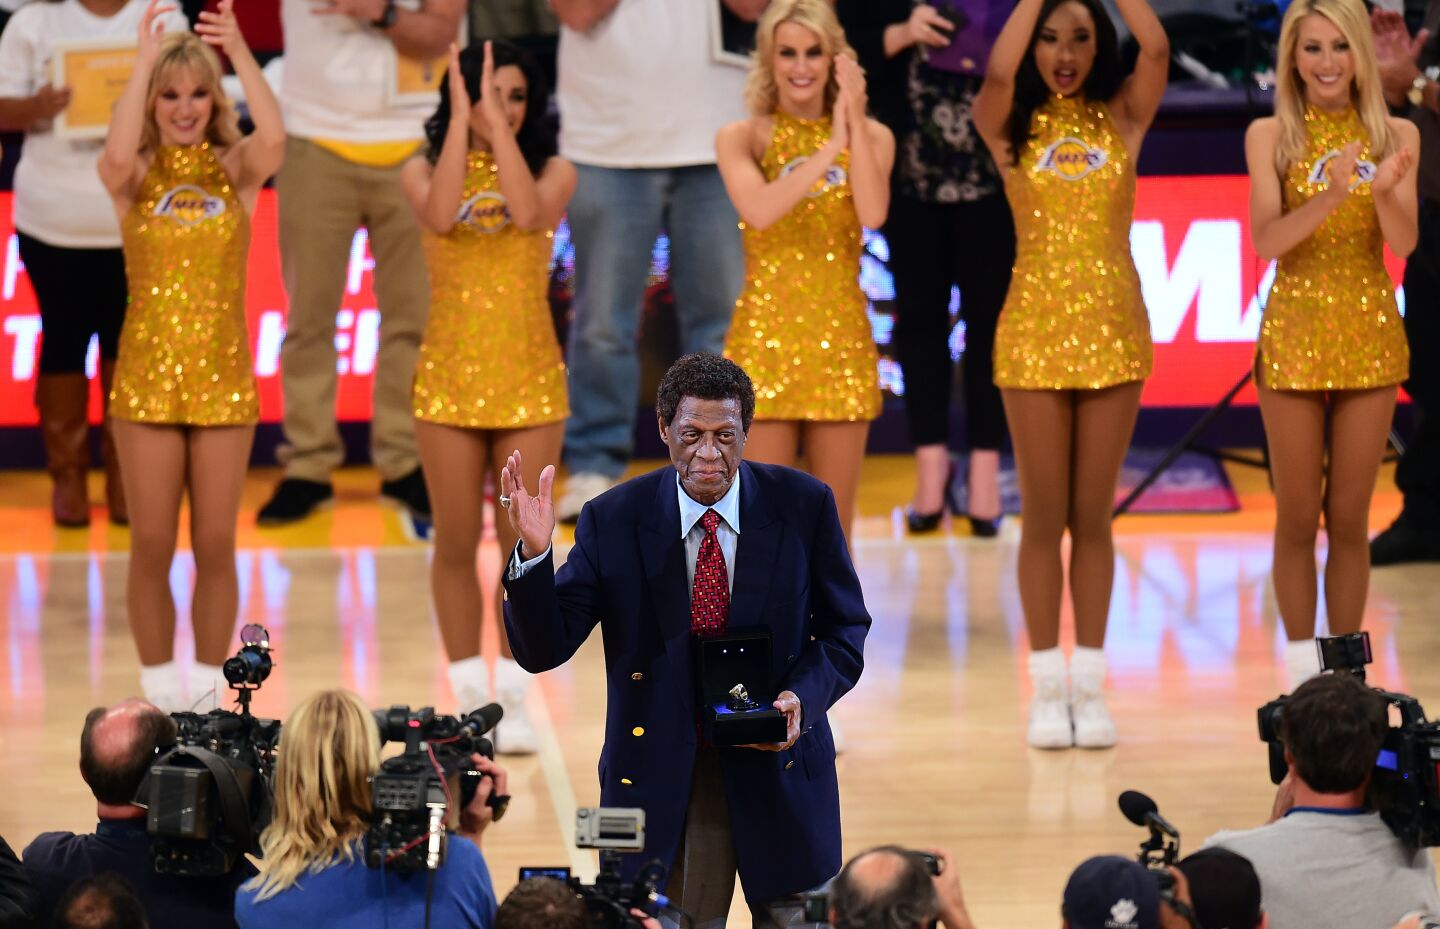 NBA legend and former Laker Elgin Baylor acknowledges the crowd upon reception of an award at halftime during the Los Angeles Lakers v Golden State Warriors NBA game at Staples Center in Los Angeles, California on November 16, 2014, where the Warriors defeated the Lakers 136-115.